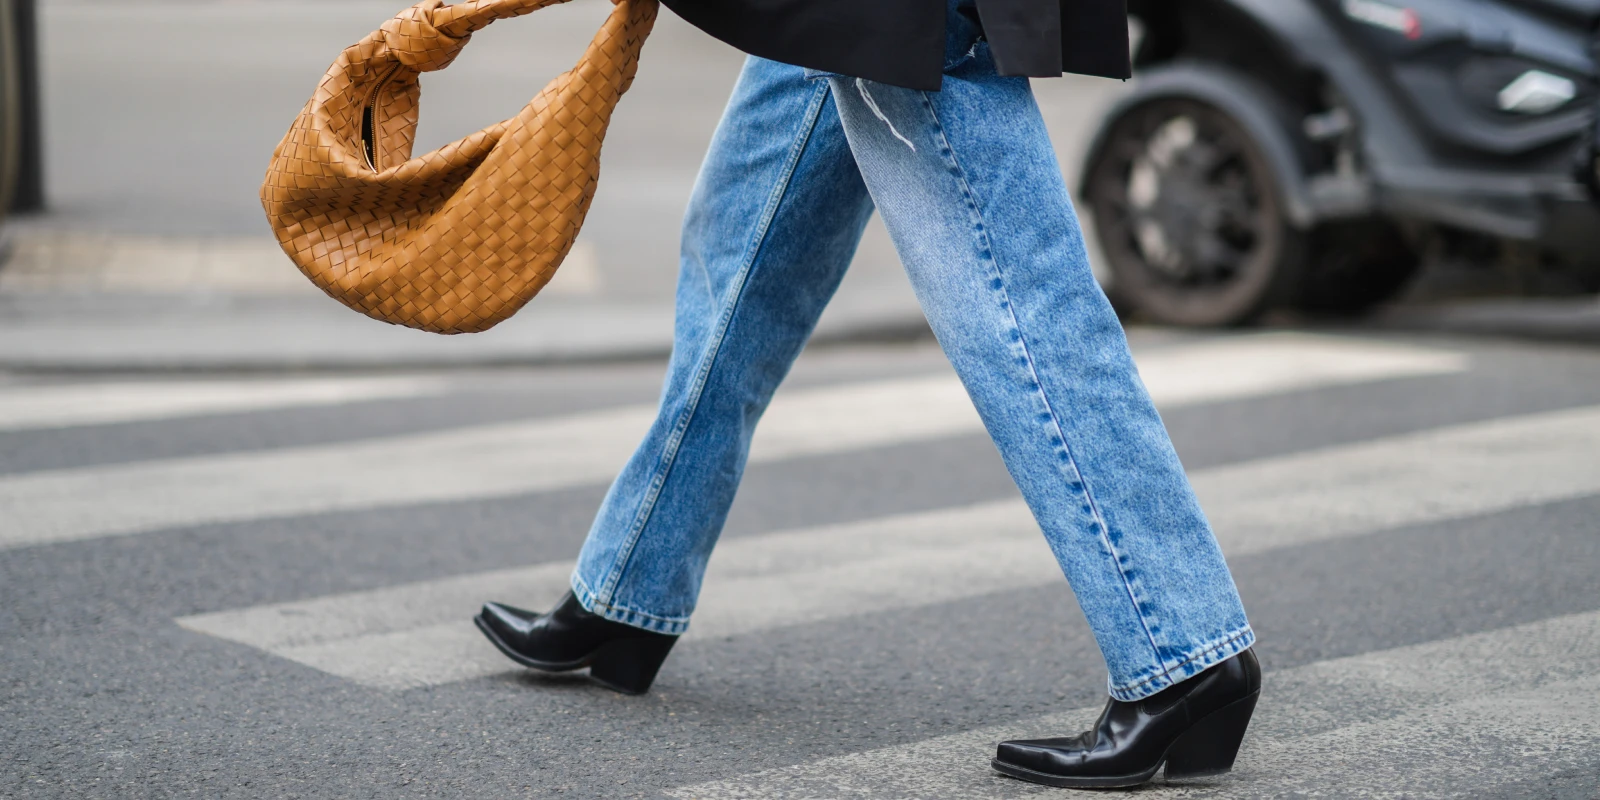 10 must-have shoes every woman should have